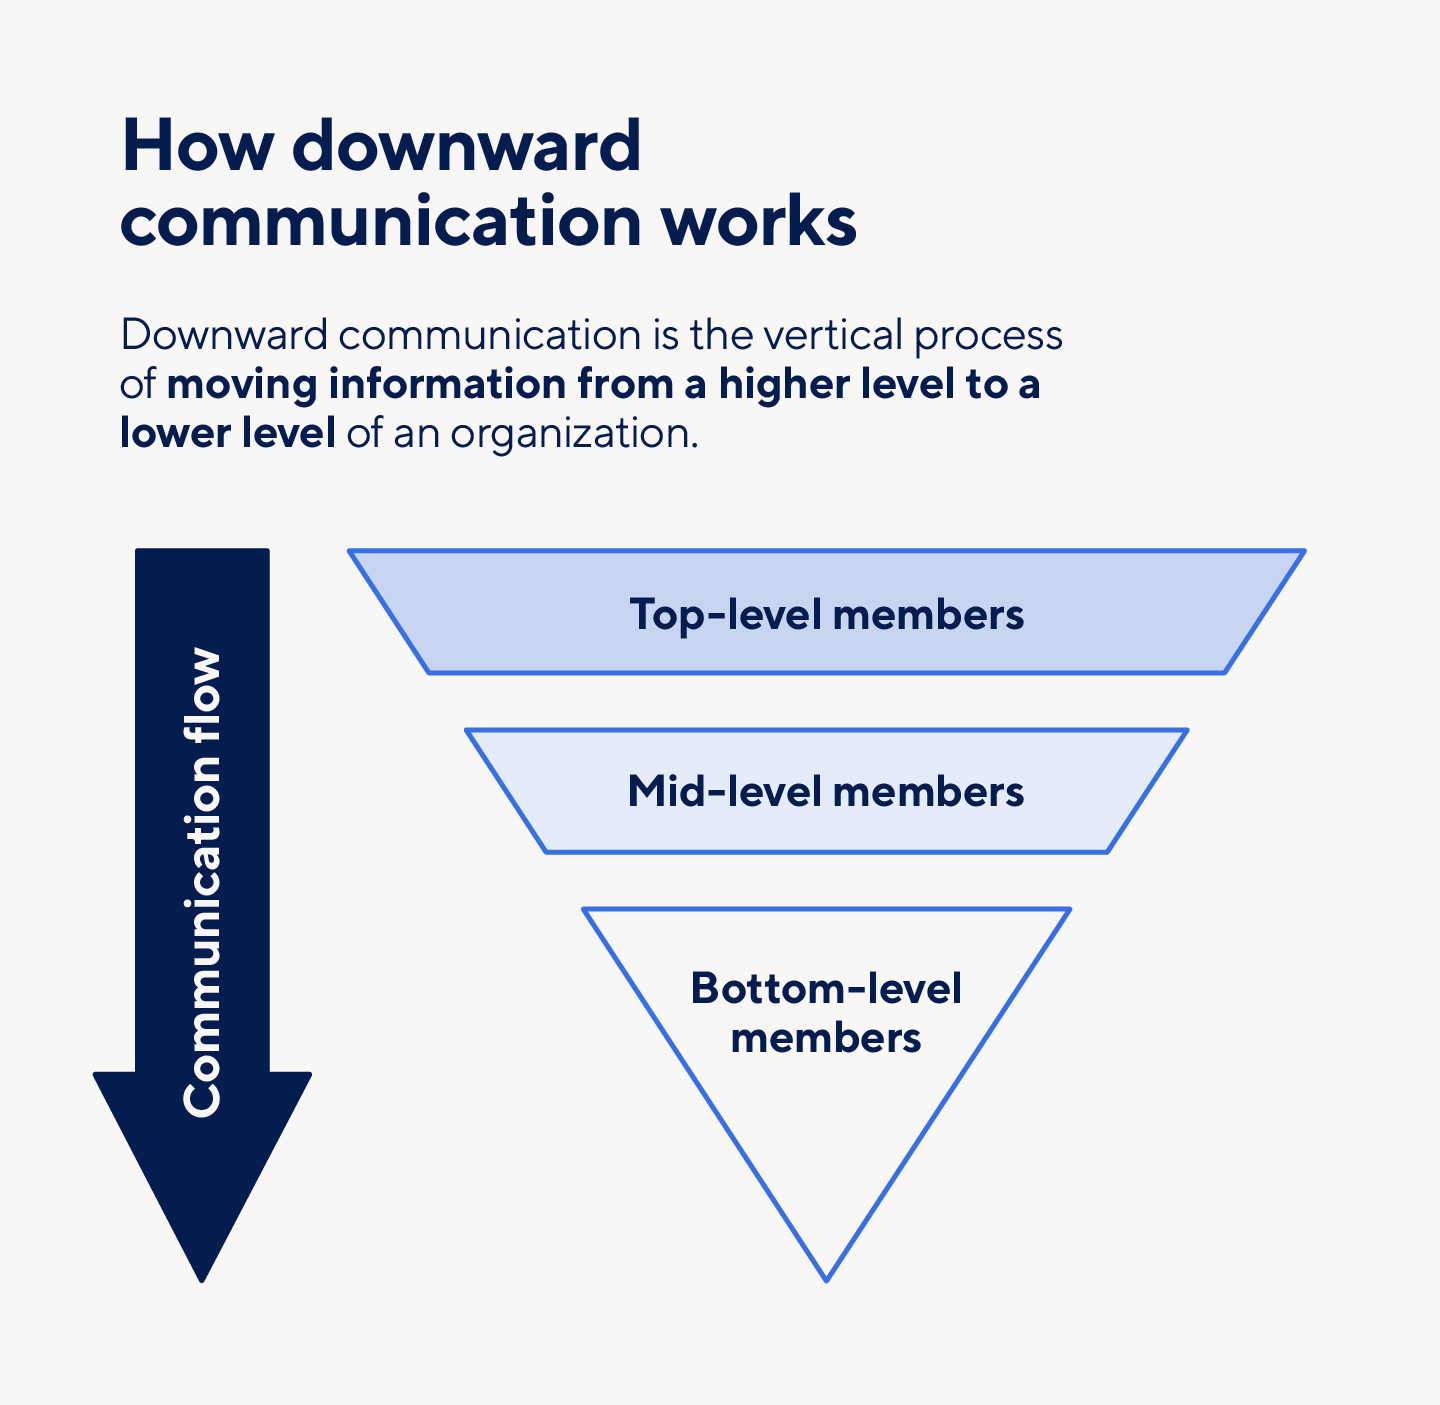 Downward communication occurs when the flow of communication begins with top-level members and moves down.